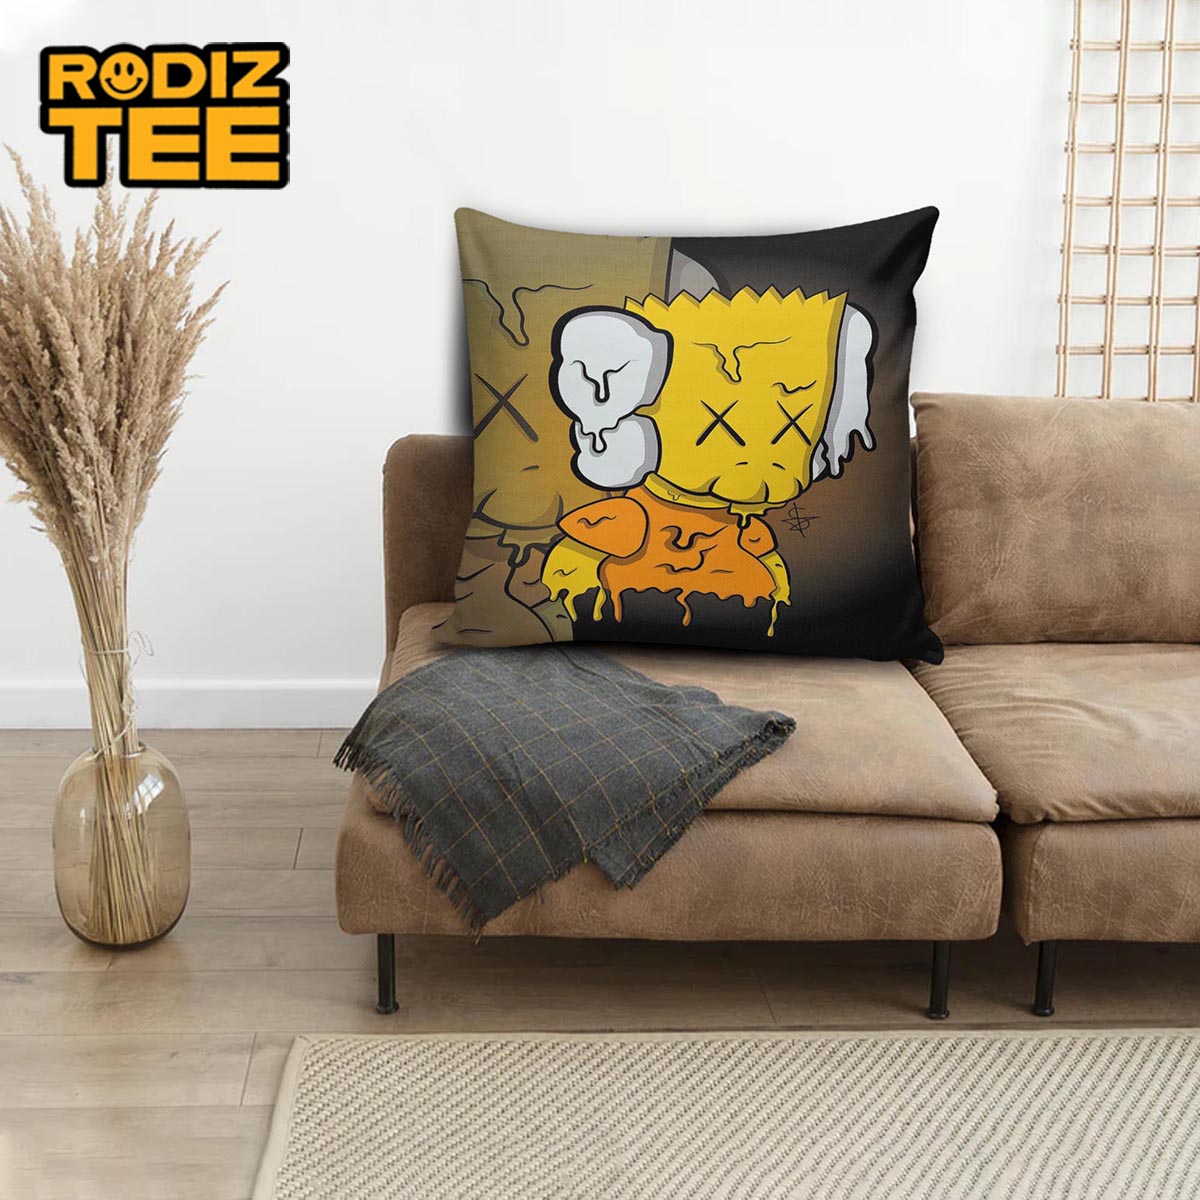 Kaws X The Simpsons Dripping Pillow